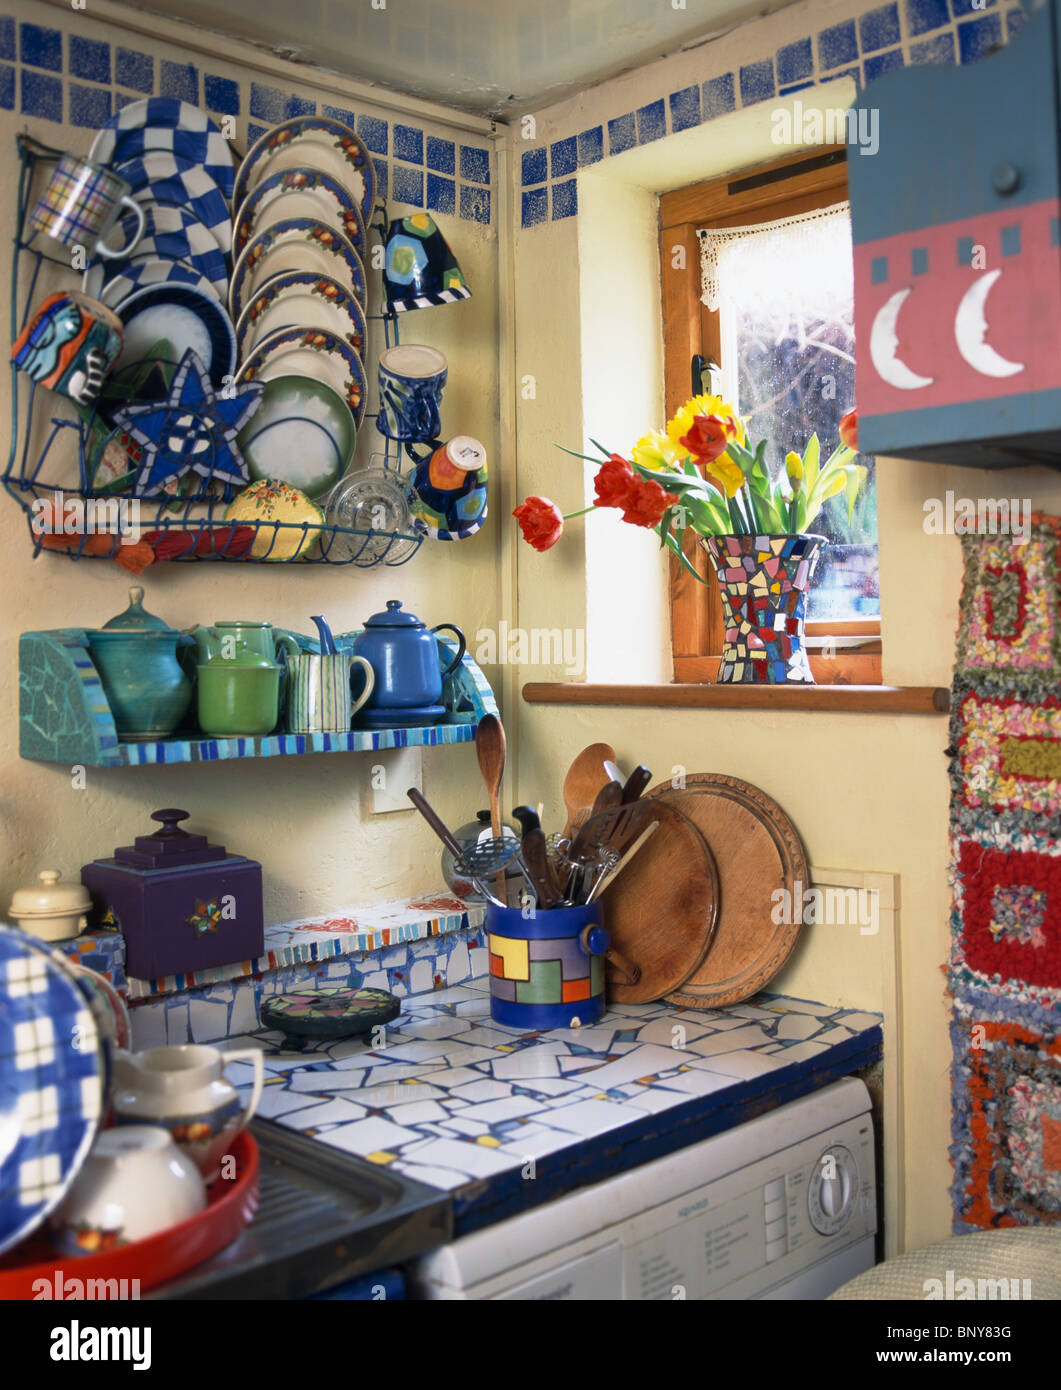 Close-up of colorful china and metal pots on metal racks above mosaic worktop in small cluttered cottage kitchen Stock Photo